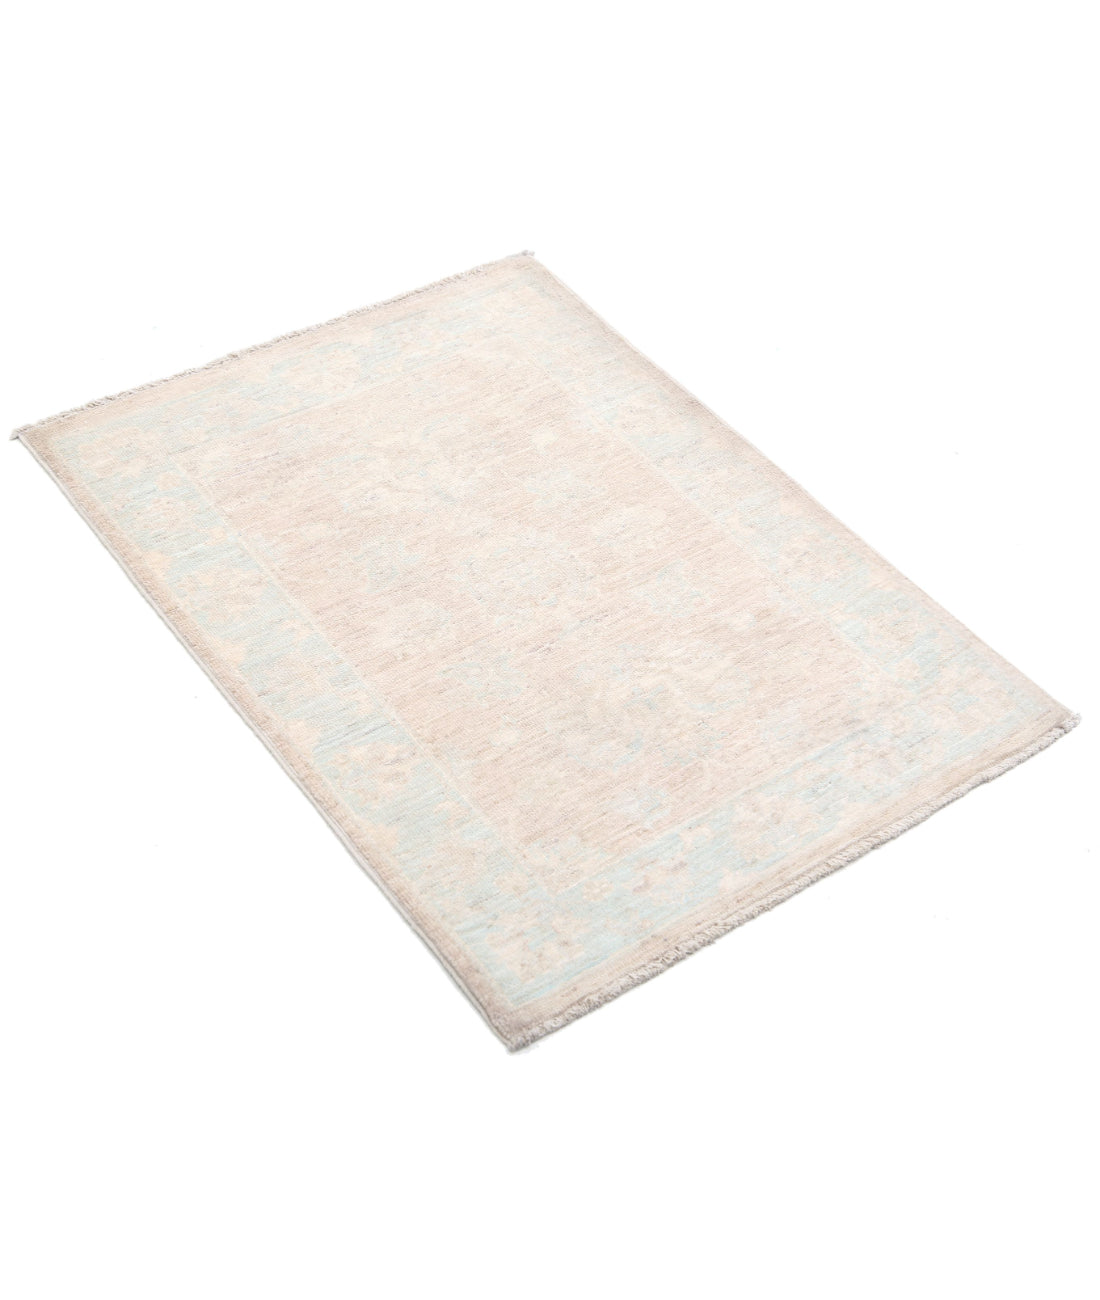 Hand Knotted Serenity Wool Rug - 2'3'' x 3'1'' 2'3'' x 3'1'' (68 X 93) / Brown / Grey